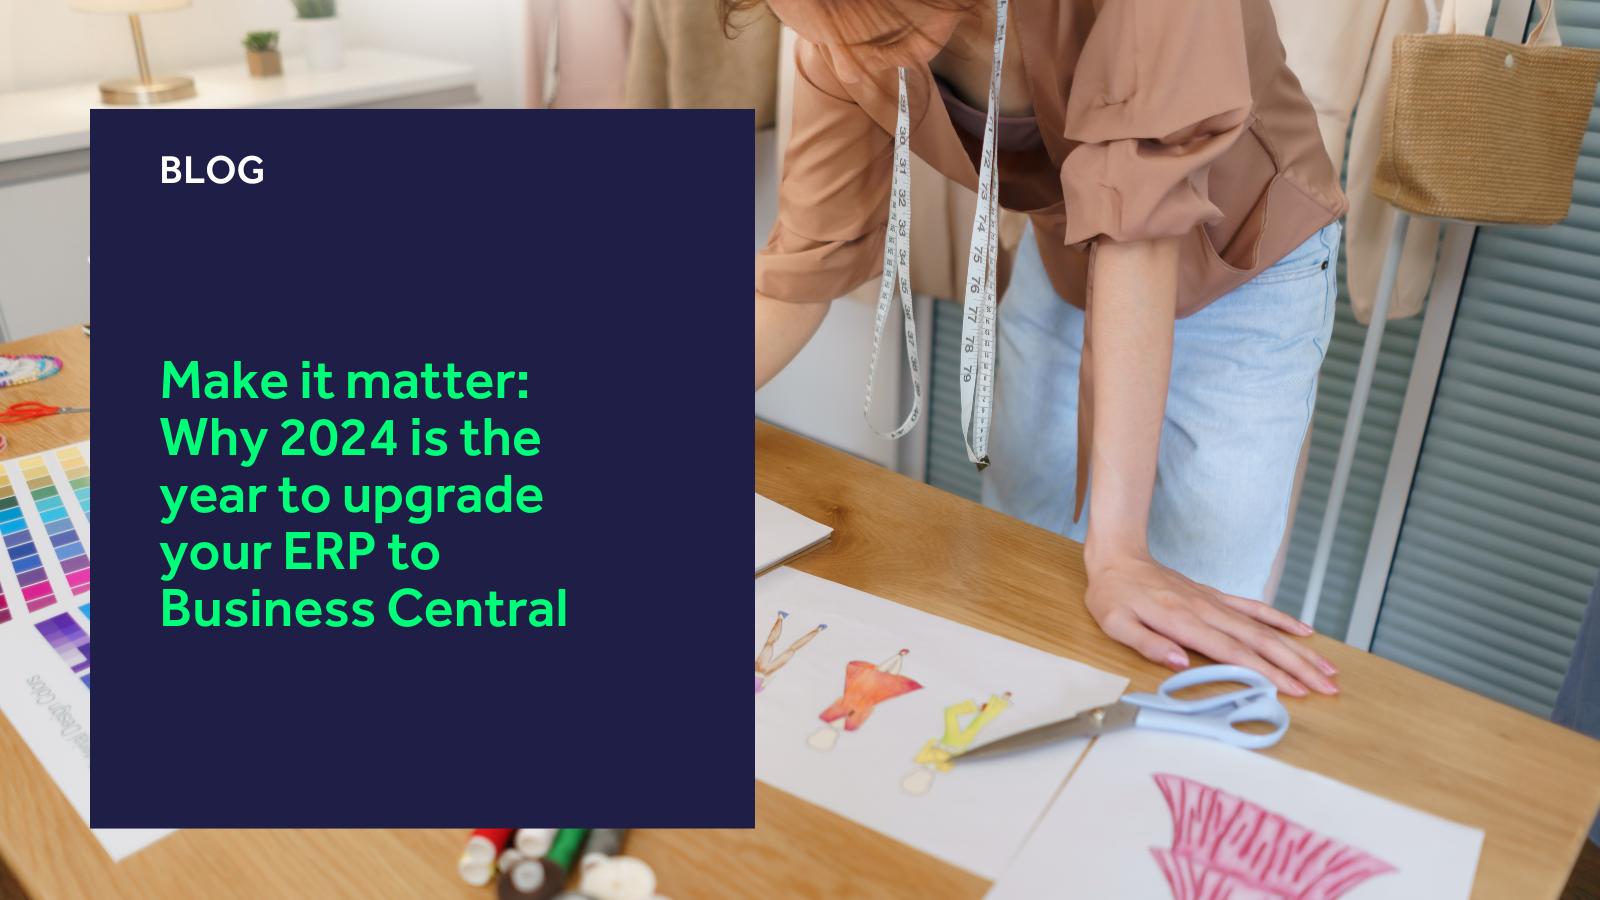 Make it matter: Why 2024 is the year to upgrade your ERP to Business Central blog header